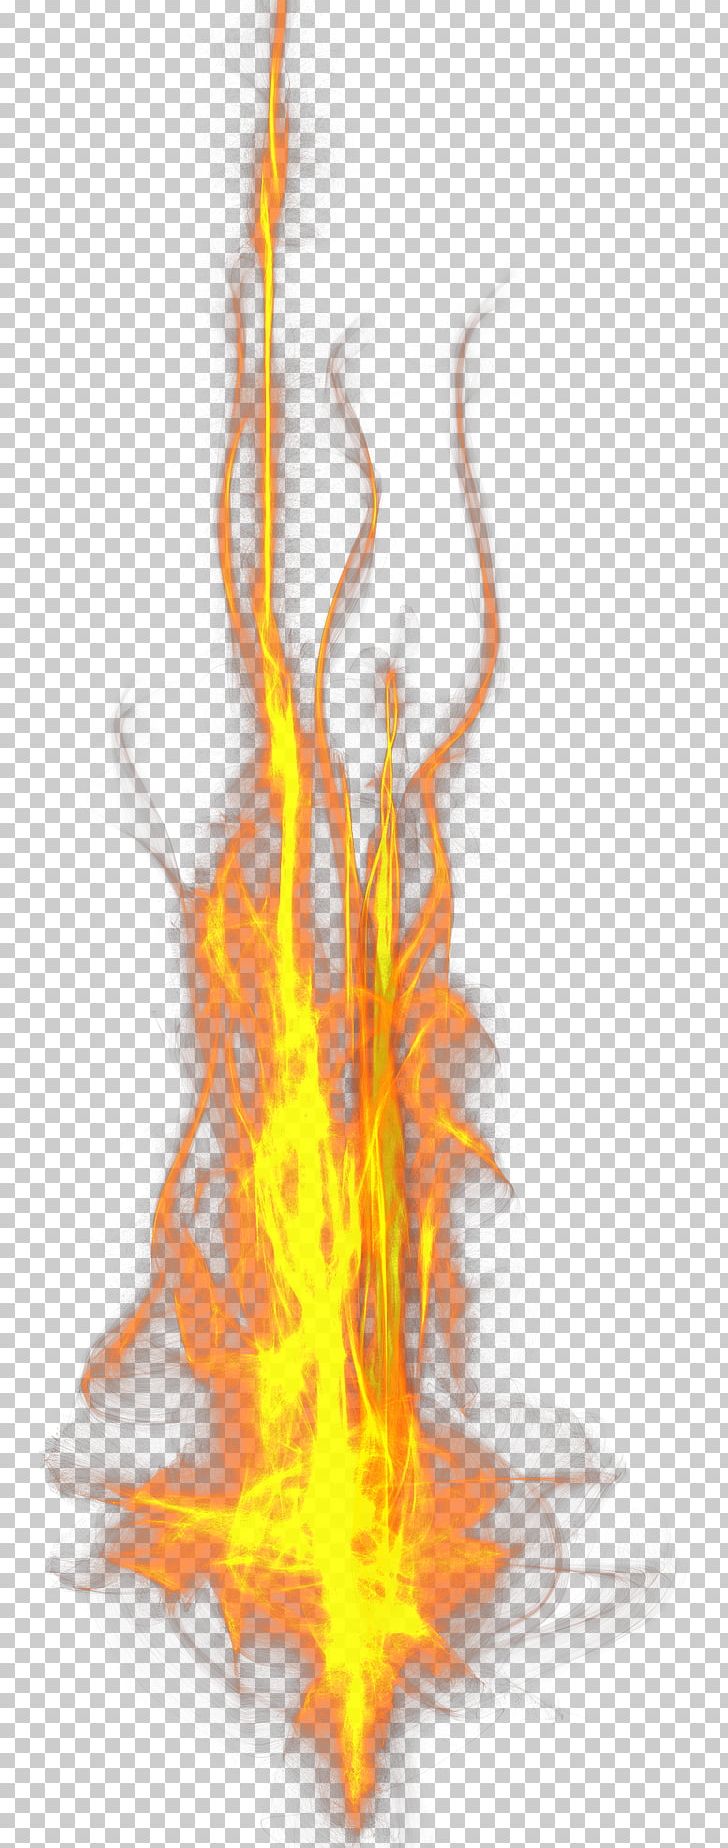 Light Flame Fire Icon PNG, Clipart, Burning Fire, Classical Element, Computer Wallpaper, Creativity, Designer Free PNG Download